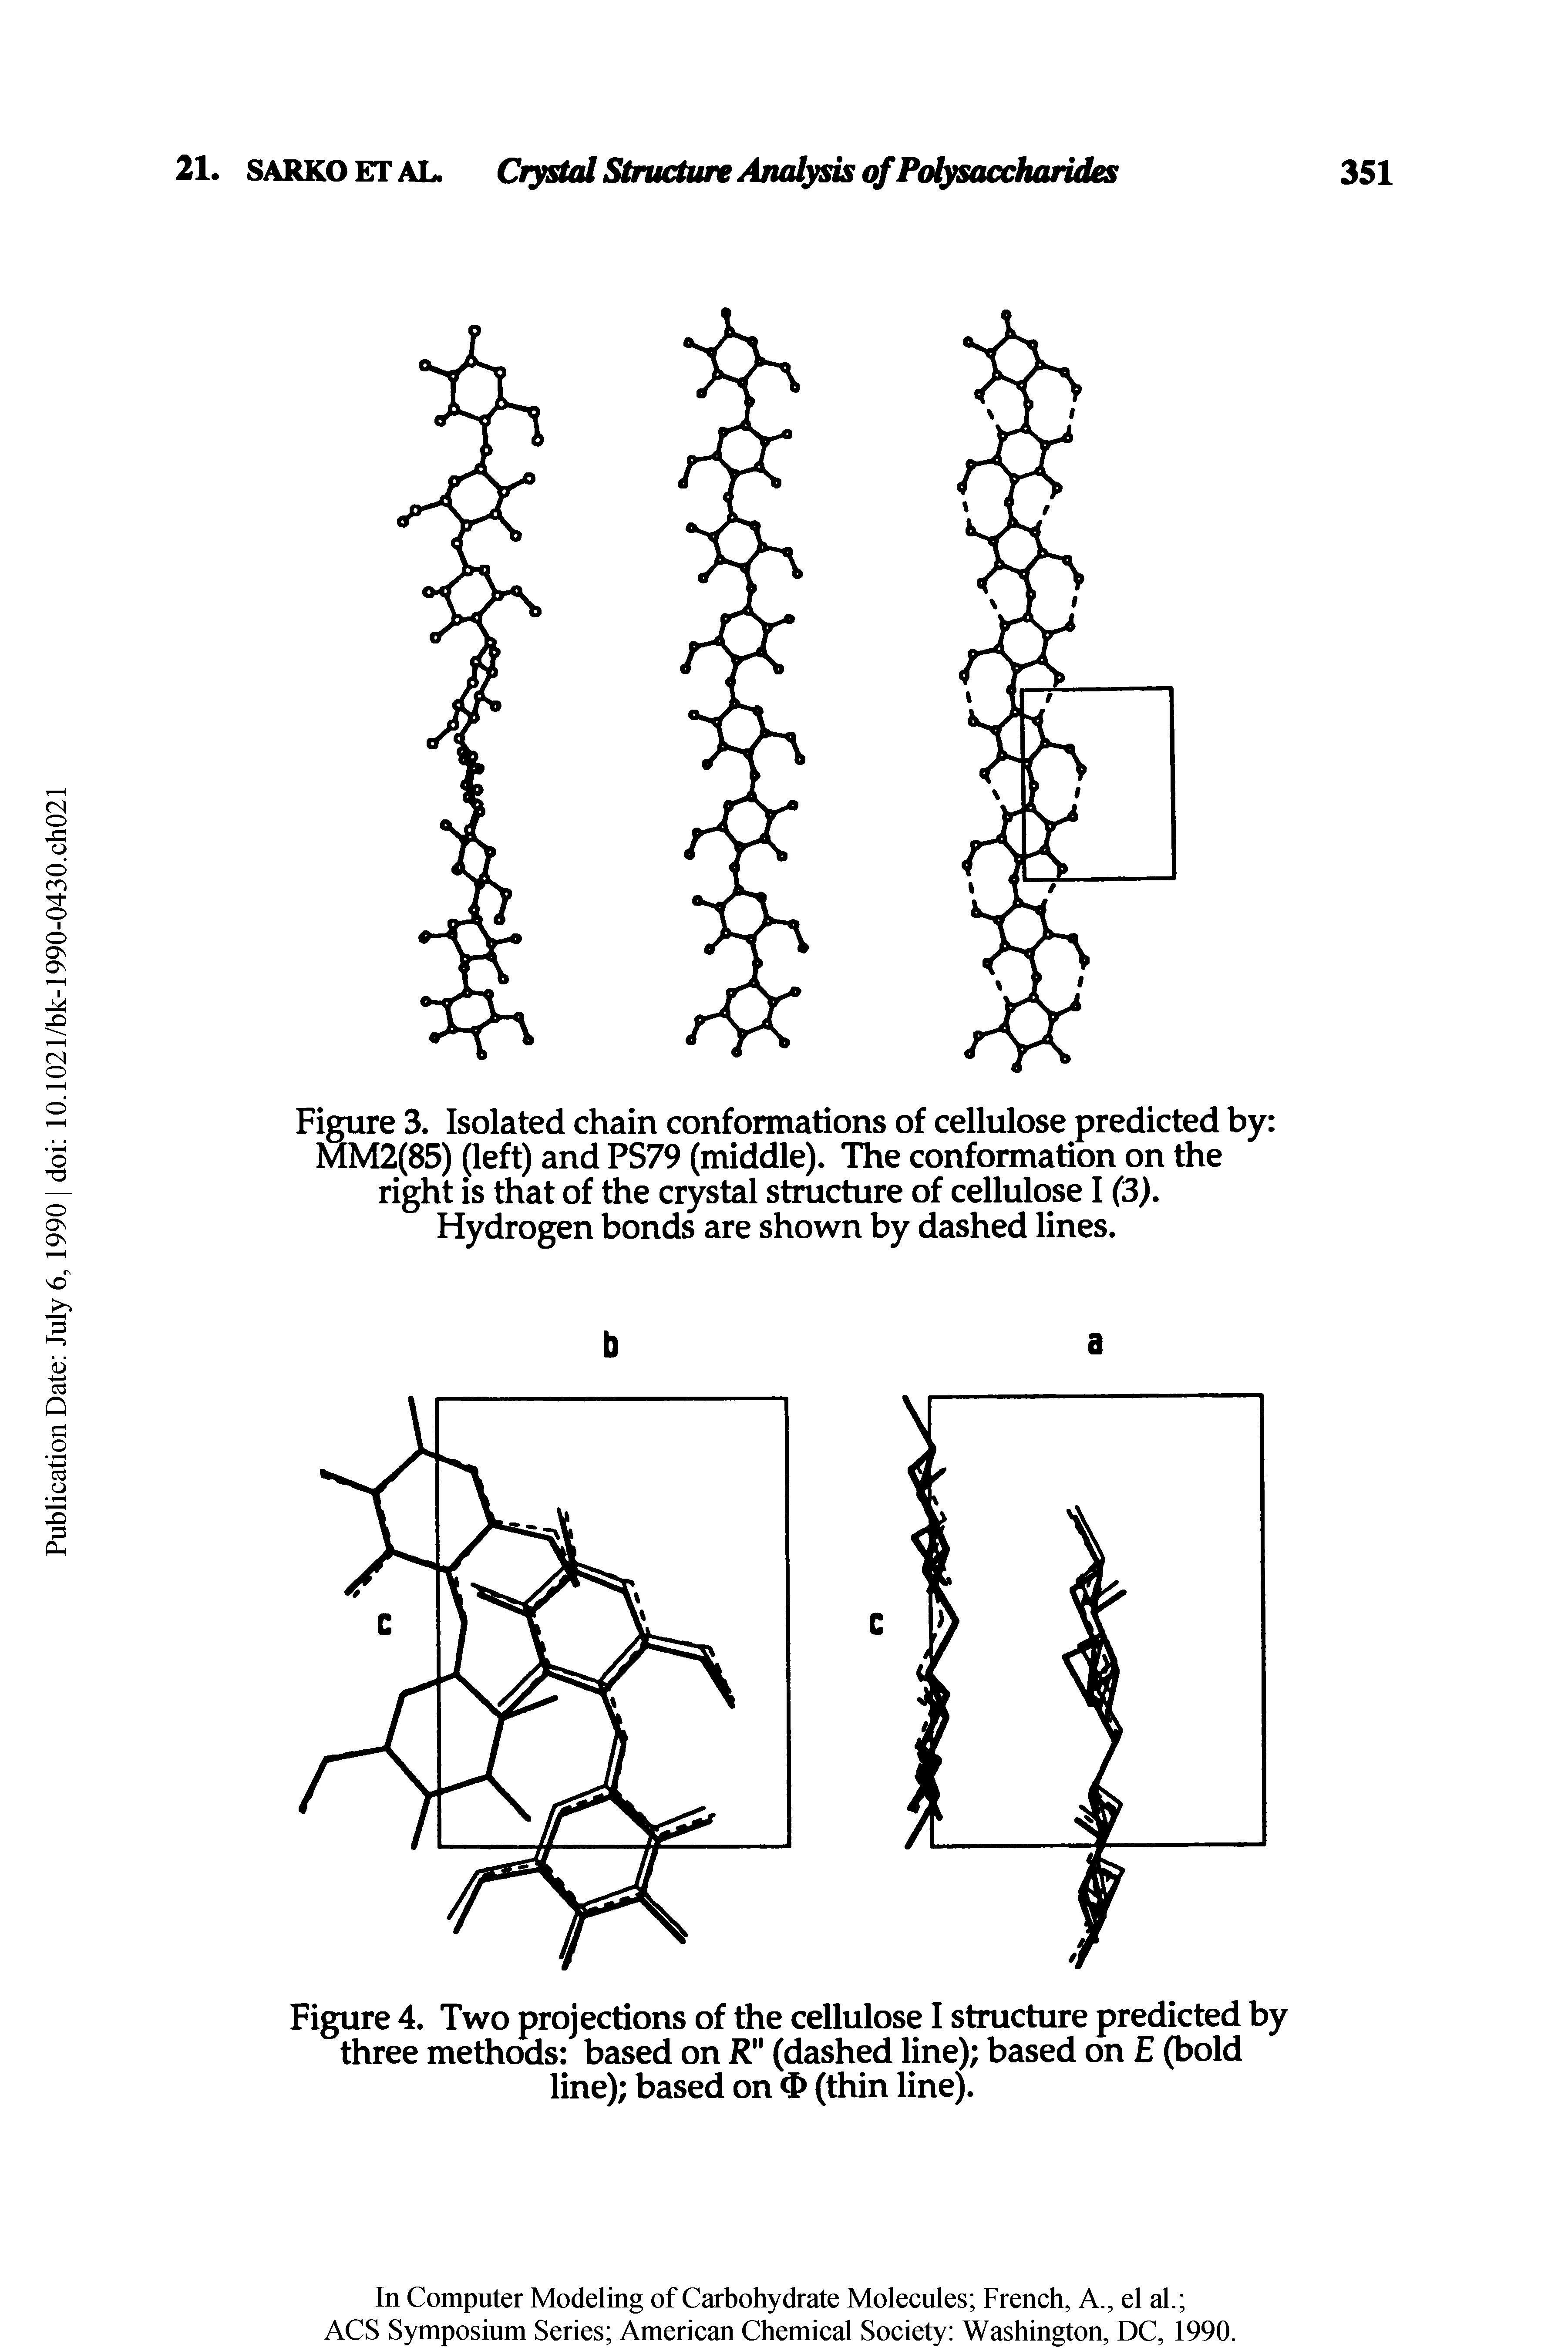 Figure 3. Isolated chain conformations of cellulose predicted by MM2(85) (left) and PS79 (middle). The conformation on the right is that of the crystal structure of cellulose I (3). Hydrogen bonds are shown by dashed lines.